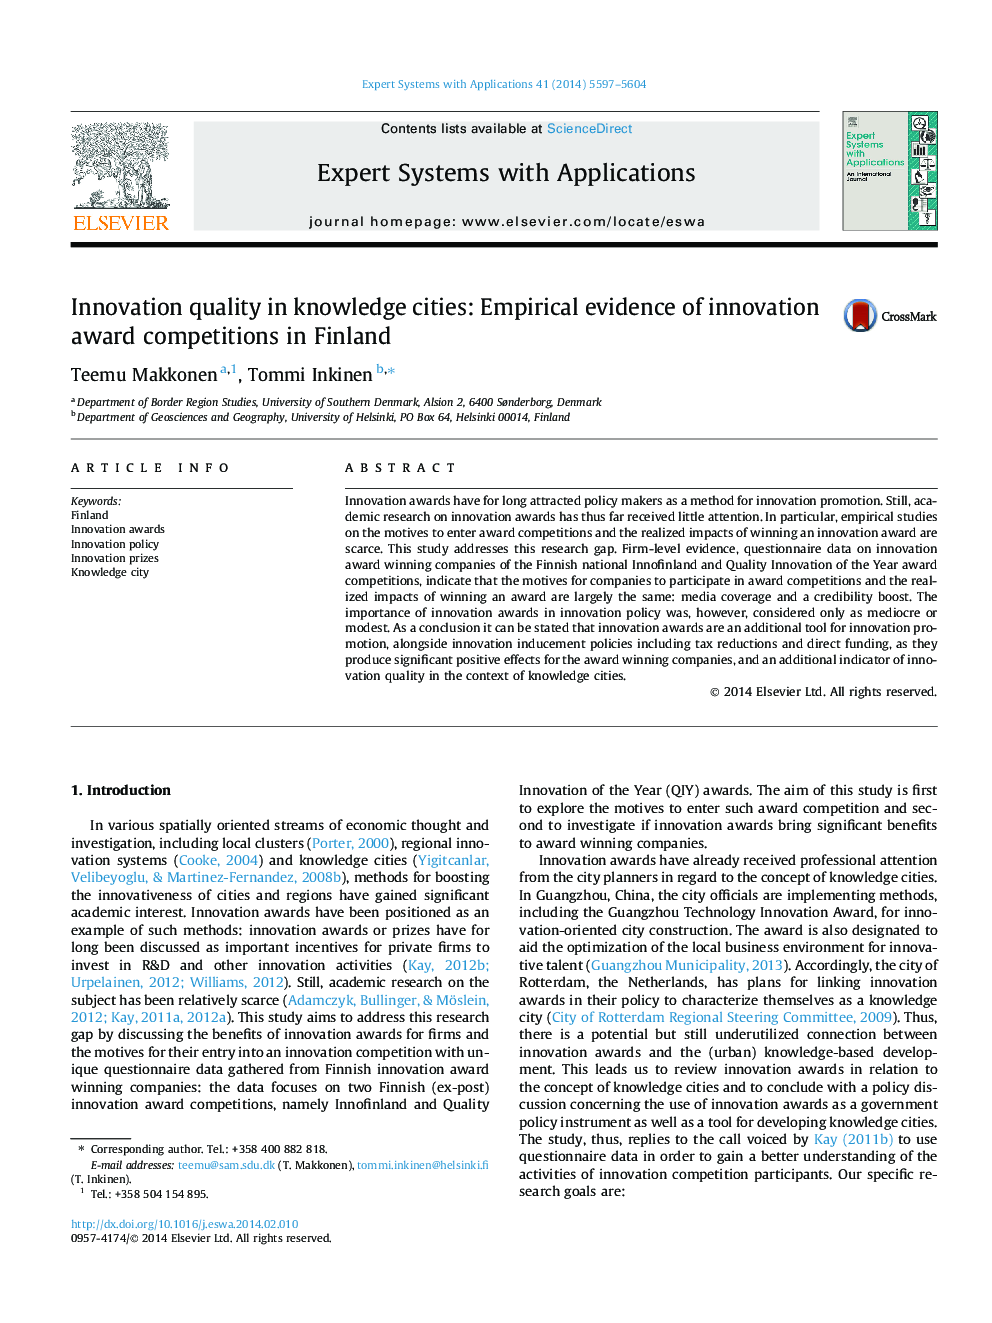 Innovation quality in knowledge cities: Empirical evidence of innovation award competitions in Finland